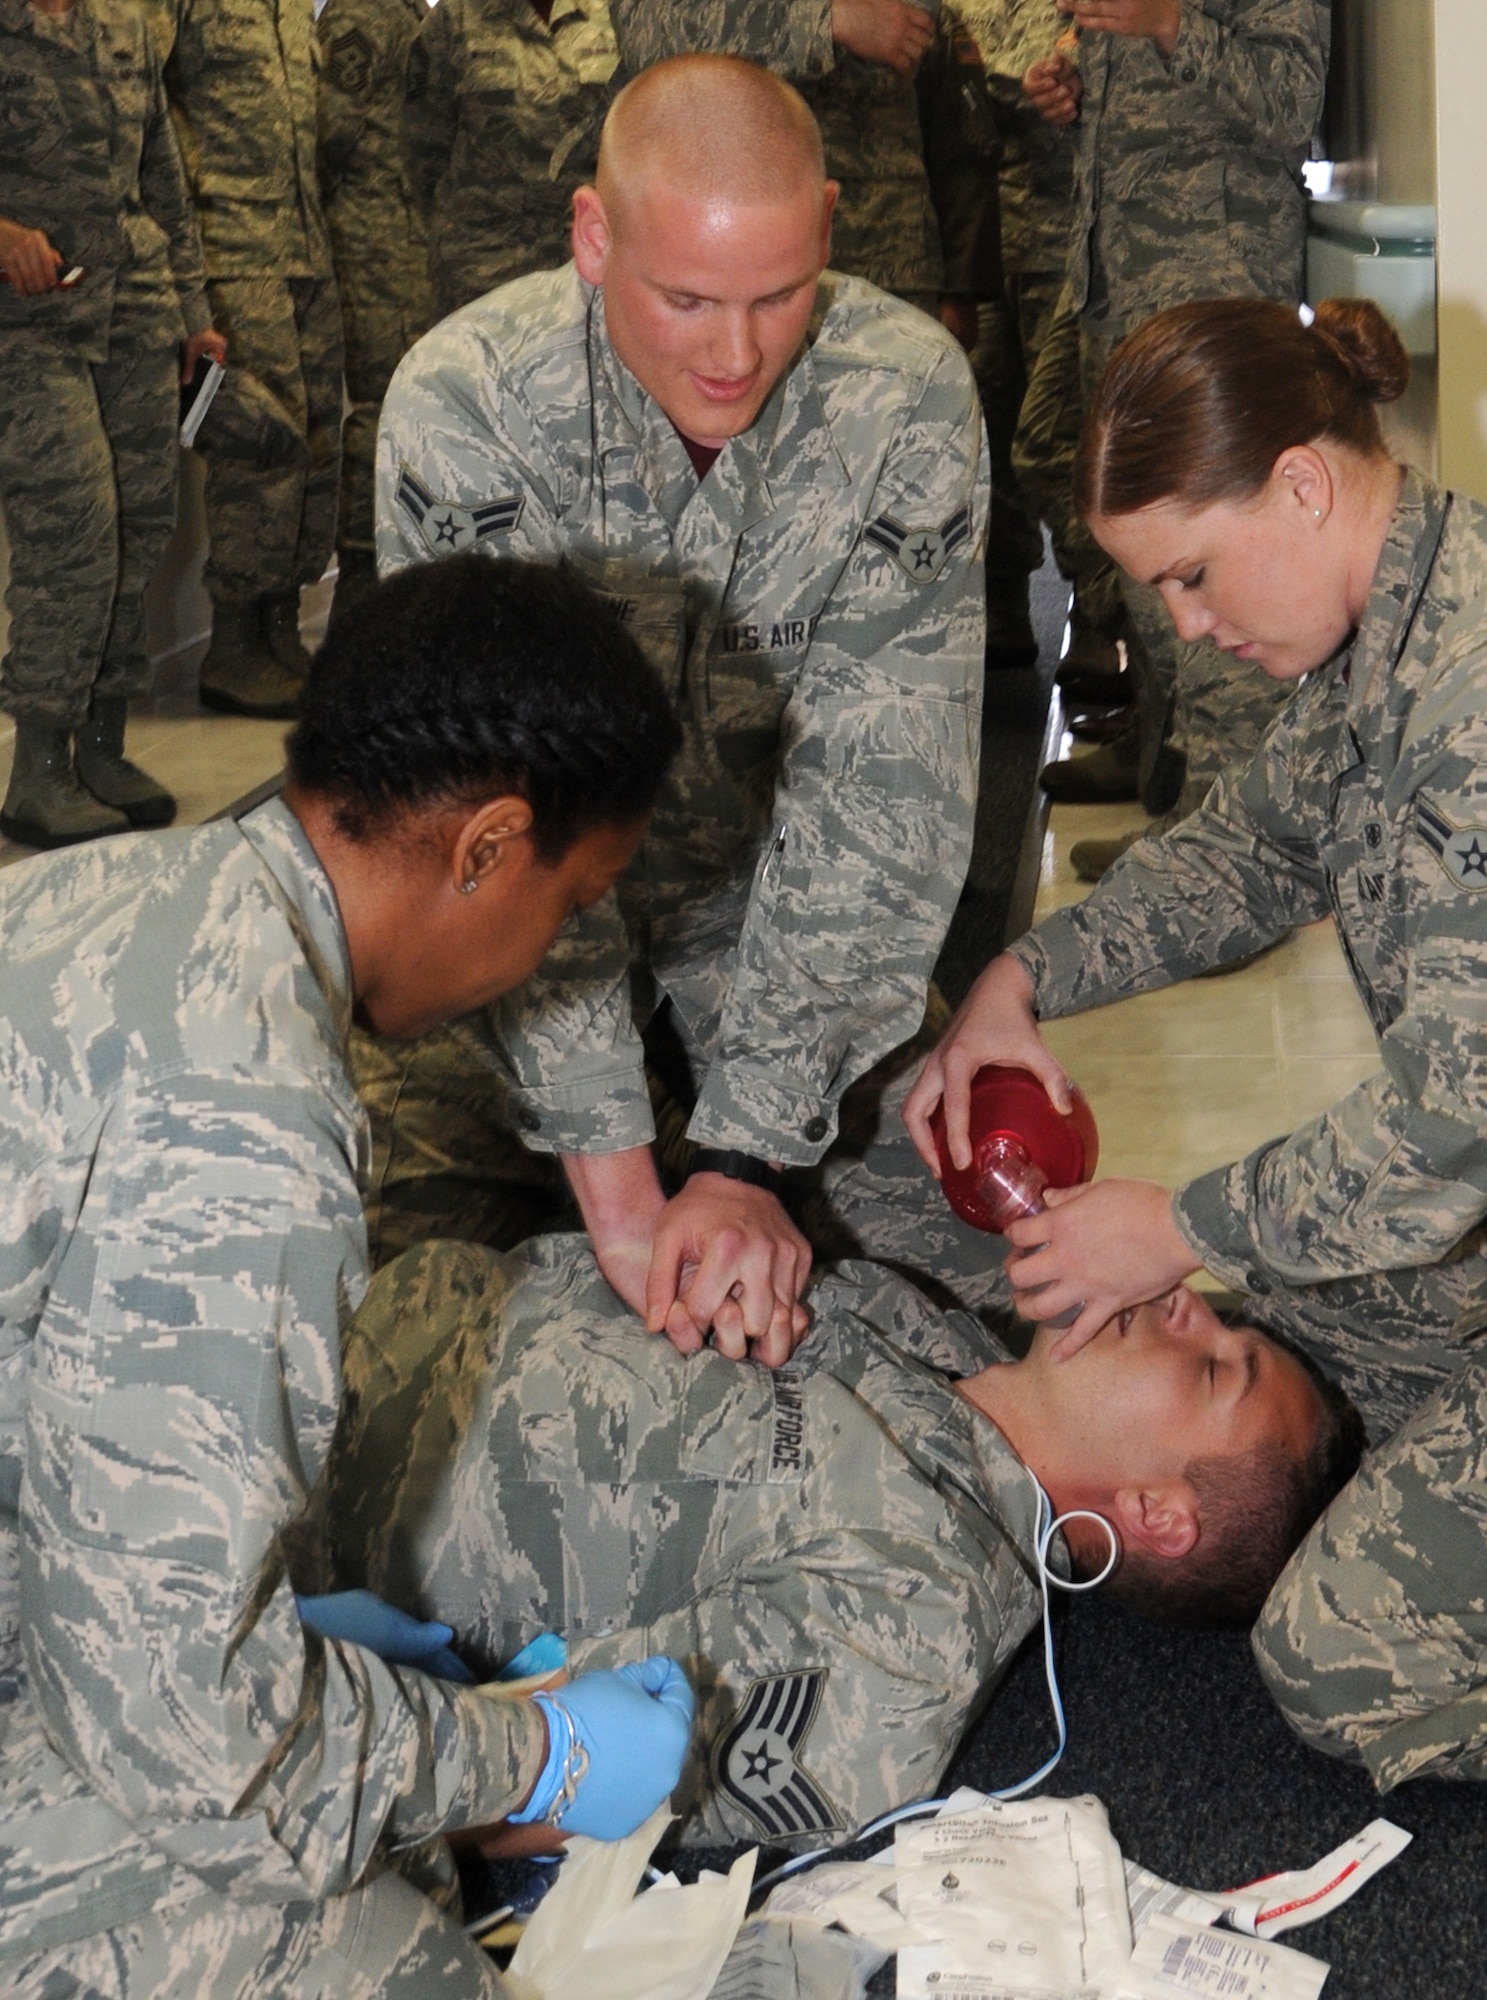 Airman 1st Class Spencer Stone, 65th Medical Operations Squadron, reacts to a mock medical emergency situation during a briefing by the 65th Medical Group for Maj. Gen. Christopher Bence, 3rd Air Force and 17th Expeditionary Air Force vice commander, on Lajes Field, Azores, Portugal, April 17, 2015. (U.S. Air Force photo by Guido Melo).